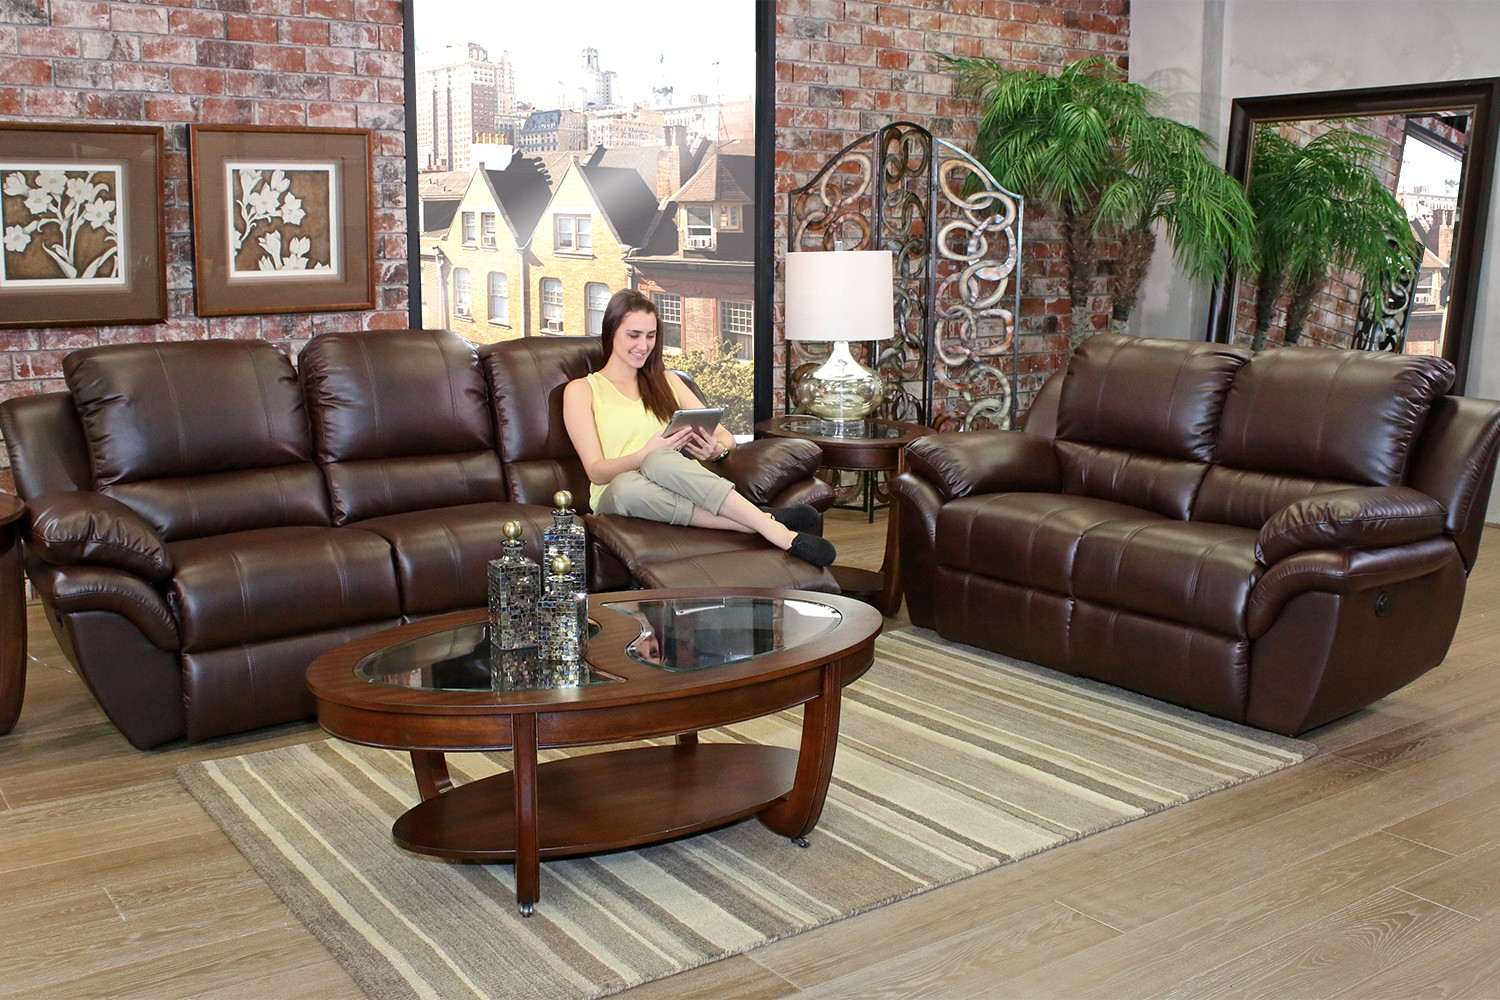 Amazing Mor Furniture For Less Bakersfield Ca With Cabo throughout Mor Furniture For Less Bakersfield